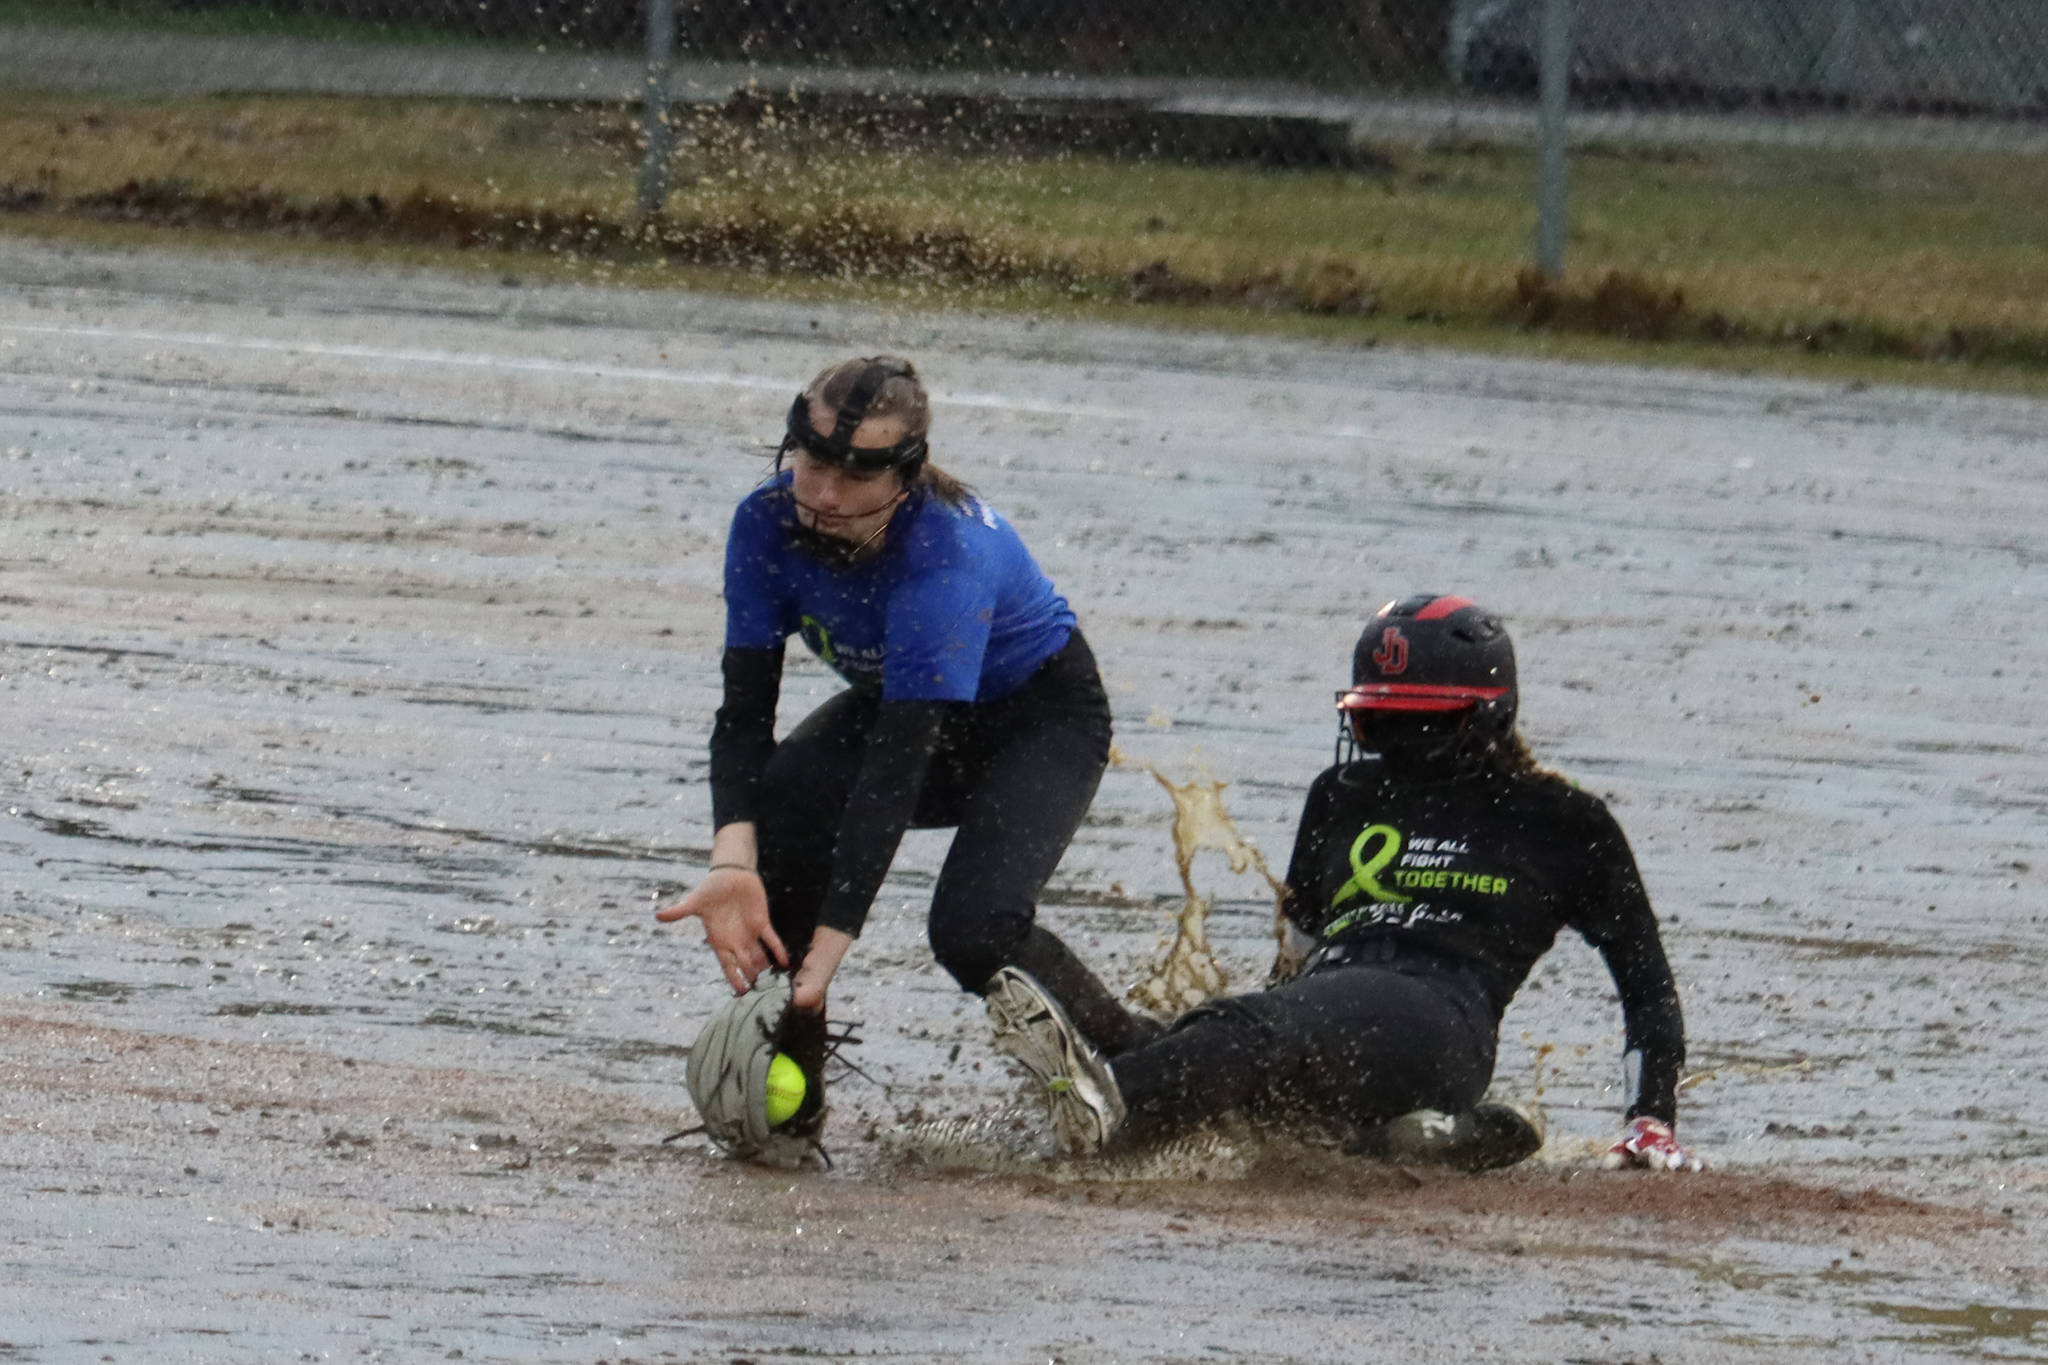 Gloria Bixby, a student-athlete at Juneau Douglas High School: Yadaa.at Kalé, slides safely into second base and avoids the tag from Thunder Mountain’s Jenna Dobson during the first inning of a drizzly Friday night game. With about three weeks left in the school year, the Juneau School District announced new COVID-19 protocols that let student-athletes compete without masks. The changes begin this week and were shared with families in an email Monday evening. (Ben Hohenstatt / Juneau Empire)